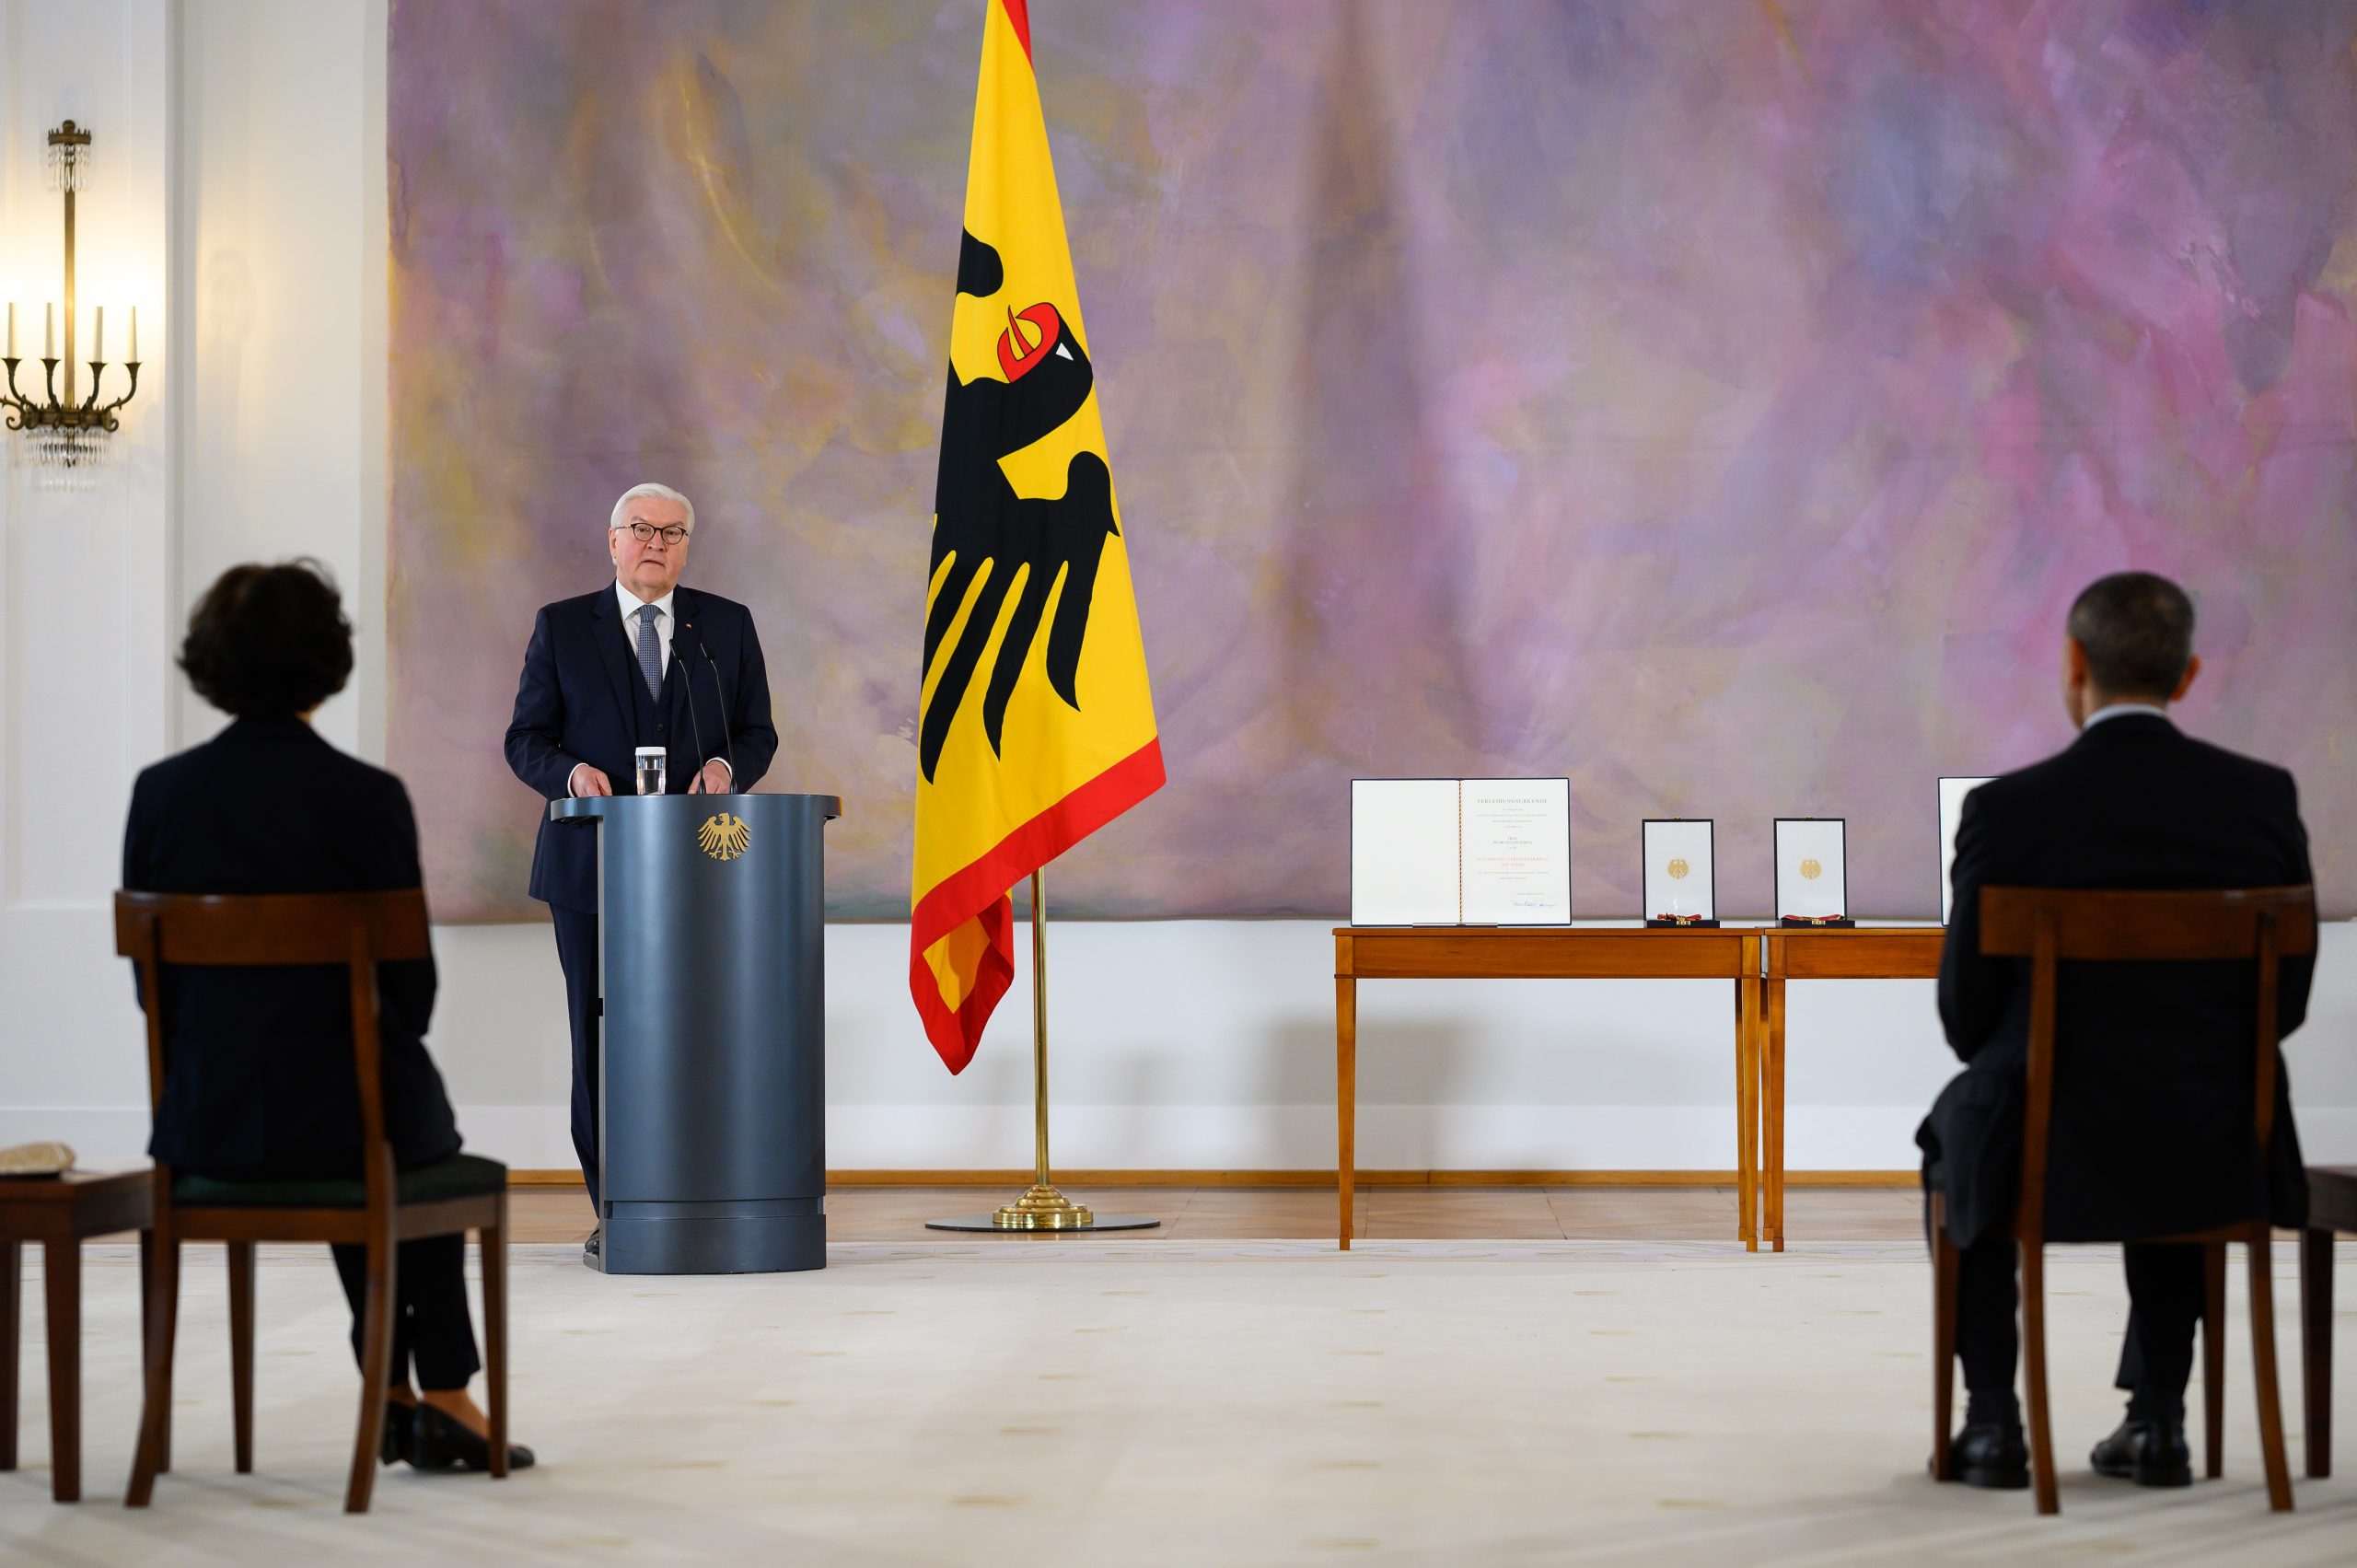 epa09083512 German President Frank-Walter Steinmeier (2-L) awards Ugur Sahin (R) and his wife Oezlem Tuereci (L), founders of the vaccine developer BioNTech, the Grand Cross of Merit with Star of the Order of Merit of the Federal Republic of Germany, at Bellevue Palace in Berlin, Germany, 19 March 2021. The couple is being honored for their tireless efforts in the field of mRNA technology research. Within a very short time, they succeeded in developing and obtaining approval for a vaccine against Covid-19, thus making a decisive contribution to containing the pandemic.  EPA/Bernd von Jutrczenka / POOL